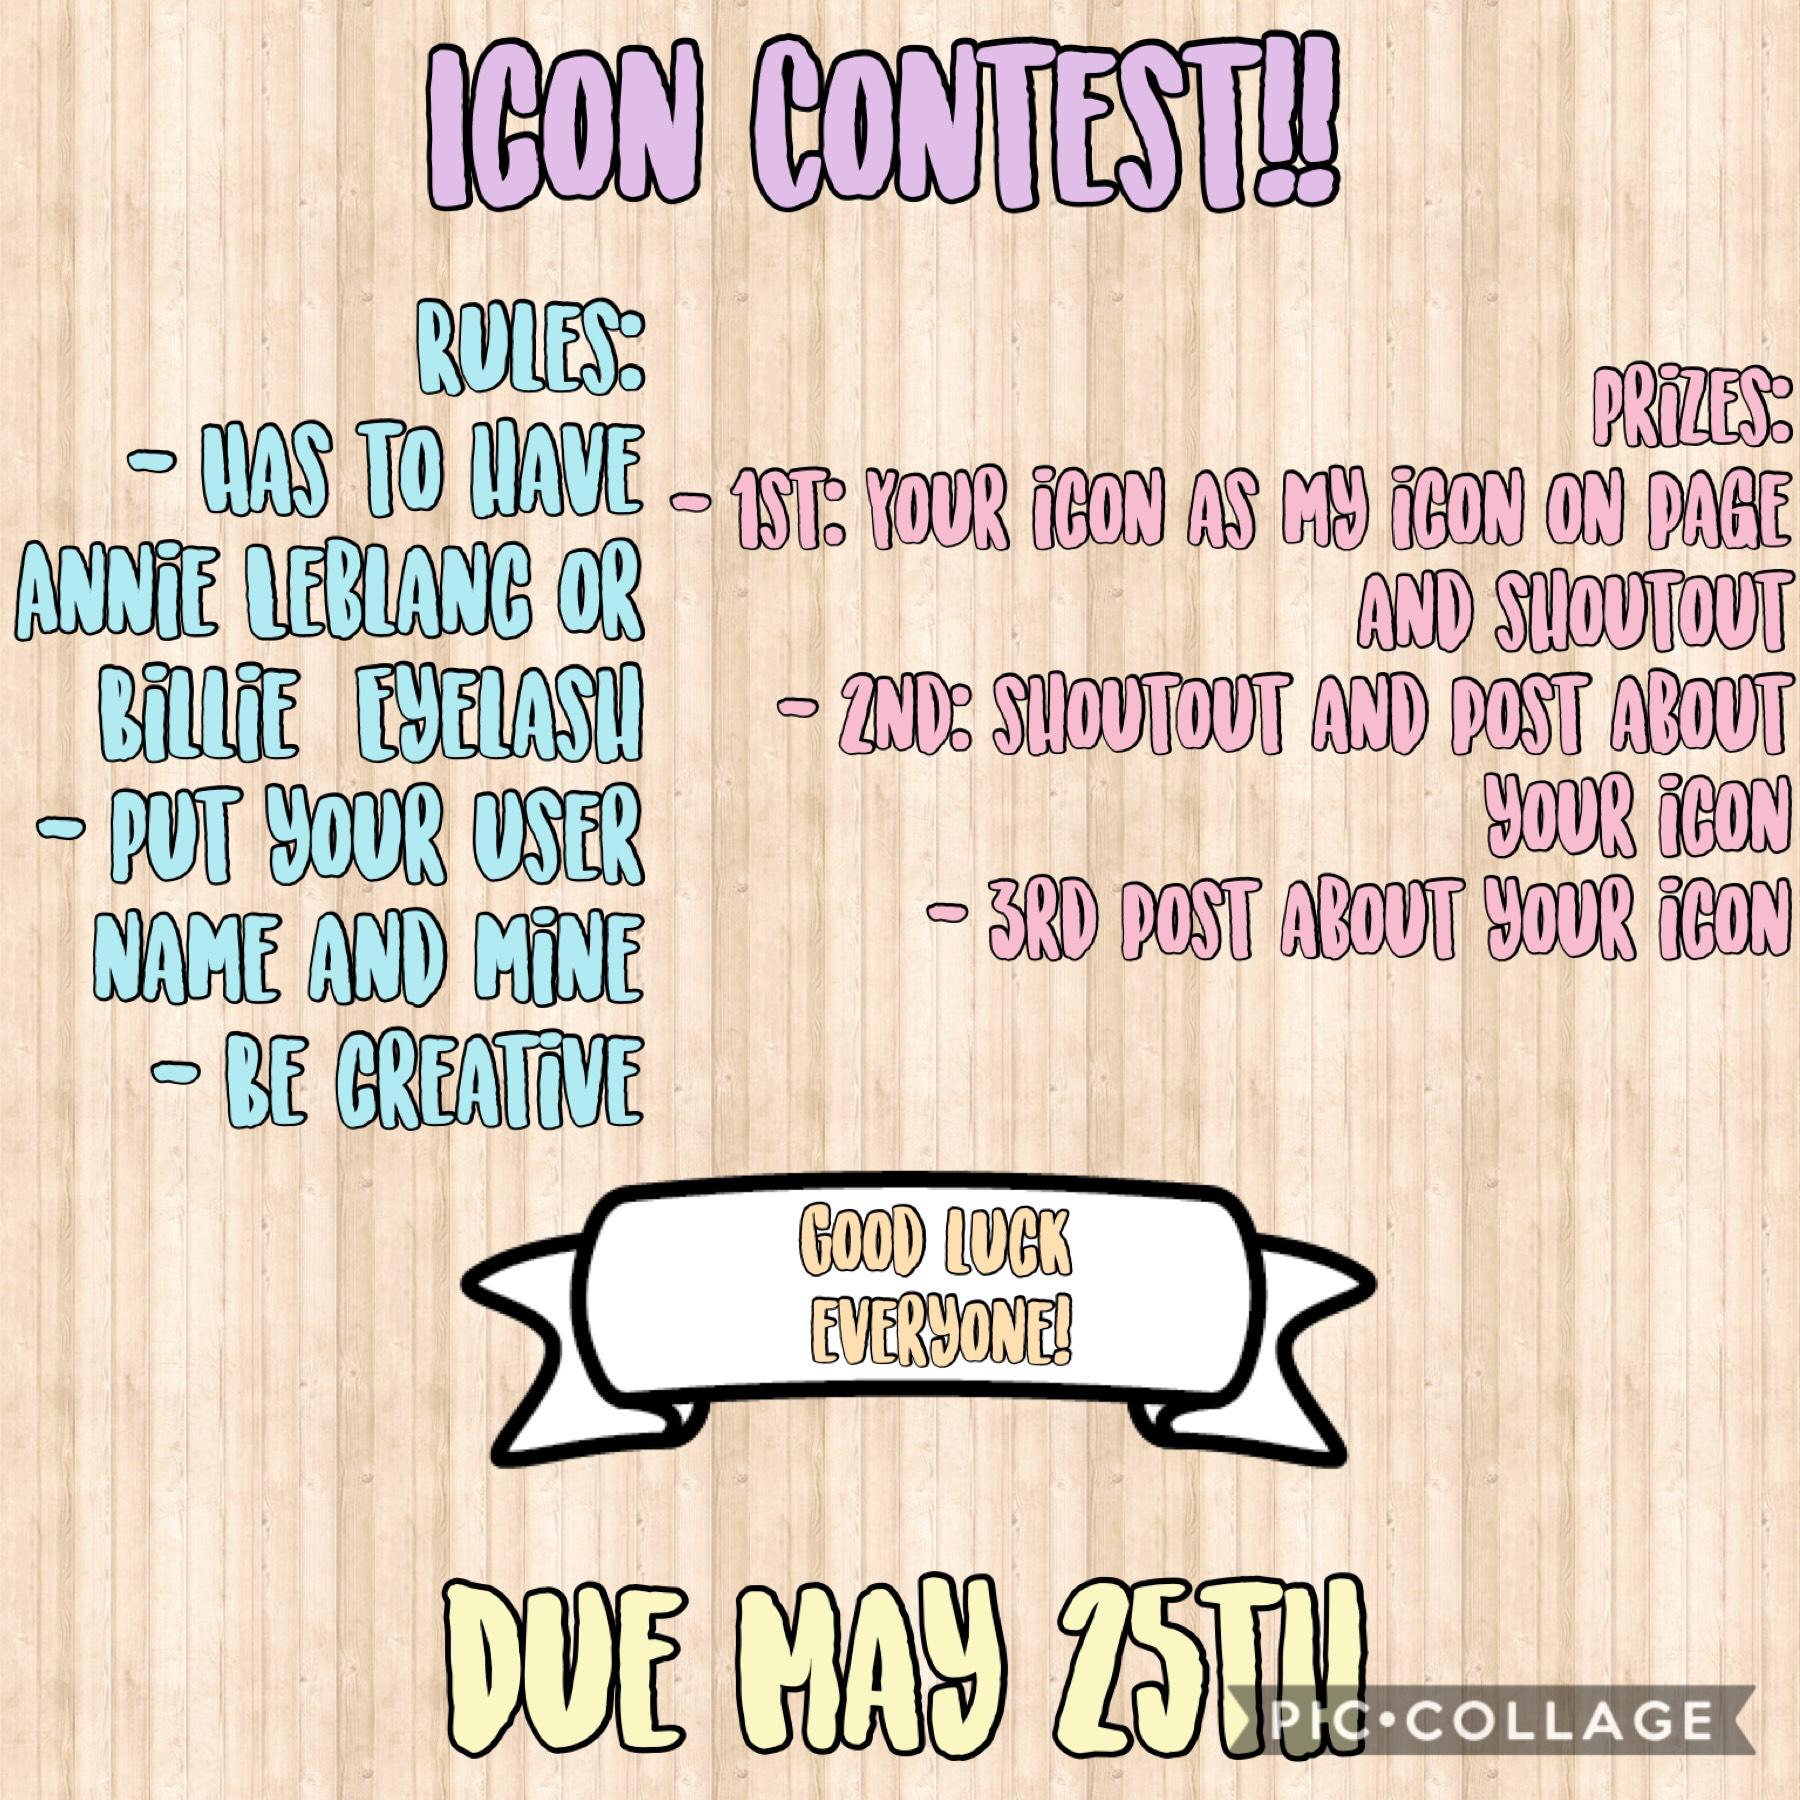 💜Tap💜
Can’t wait to see all of your icons!😁